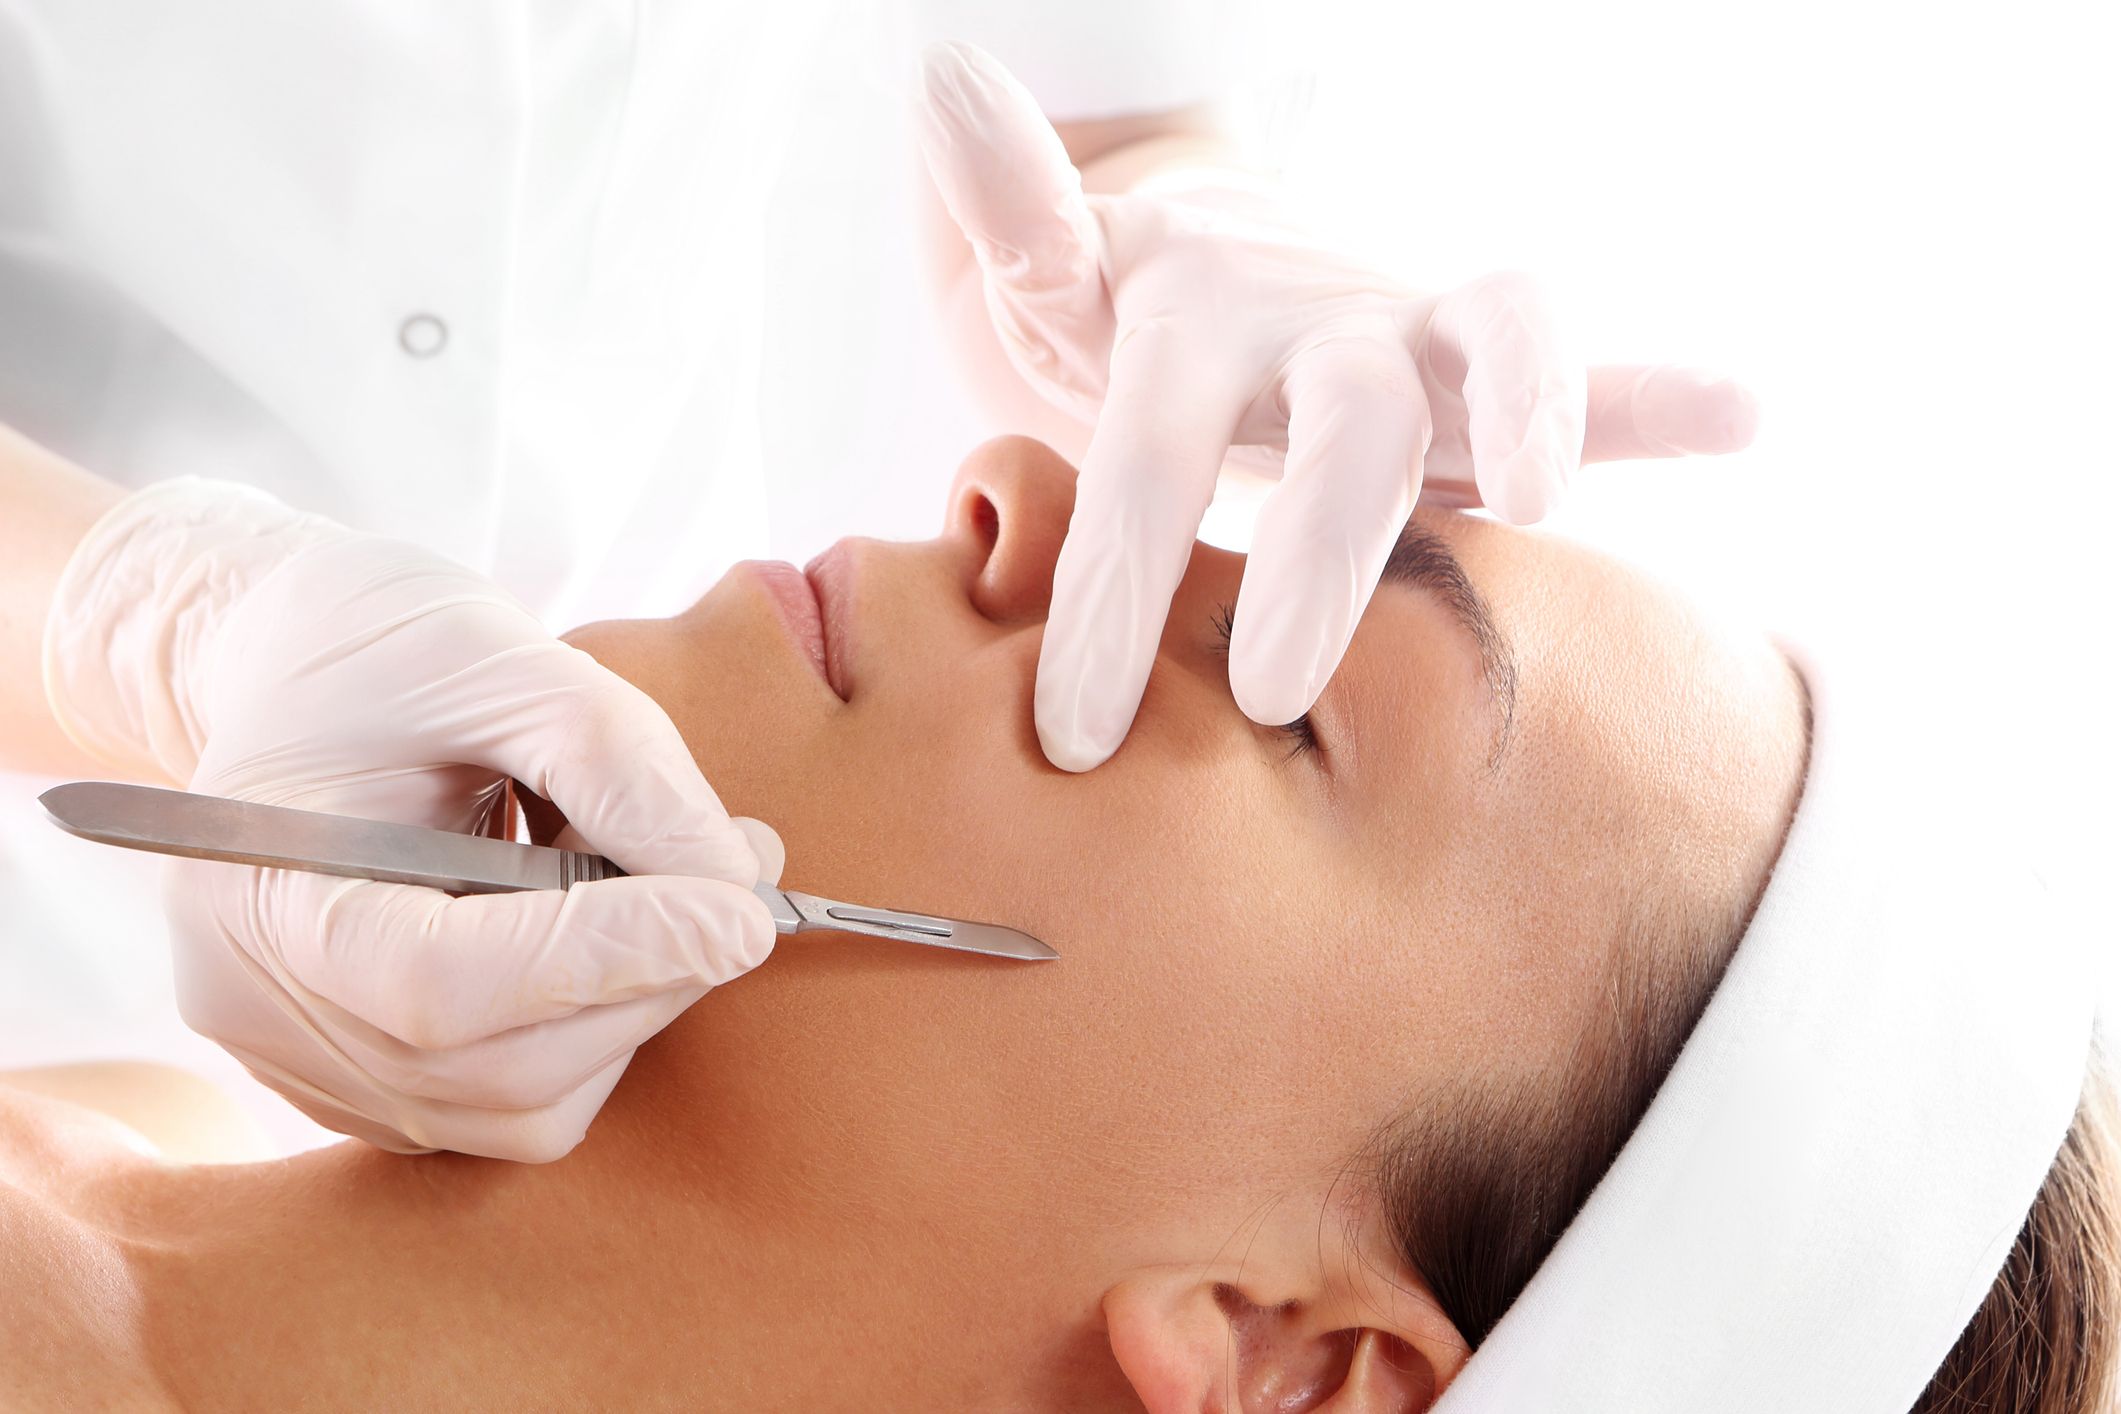 Salon Dermaplaning vs. At-Home Dermaplaning: Key Differences